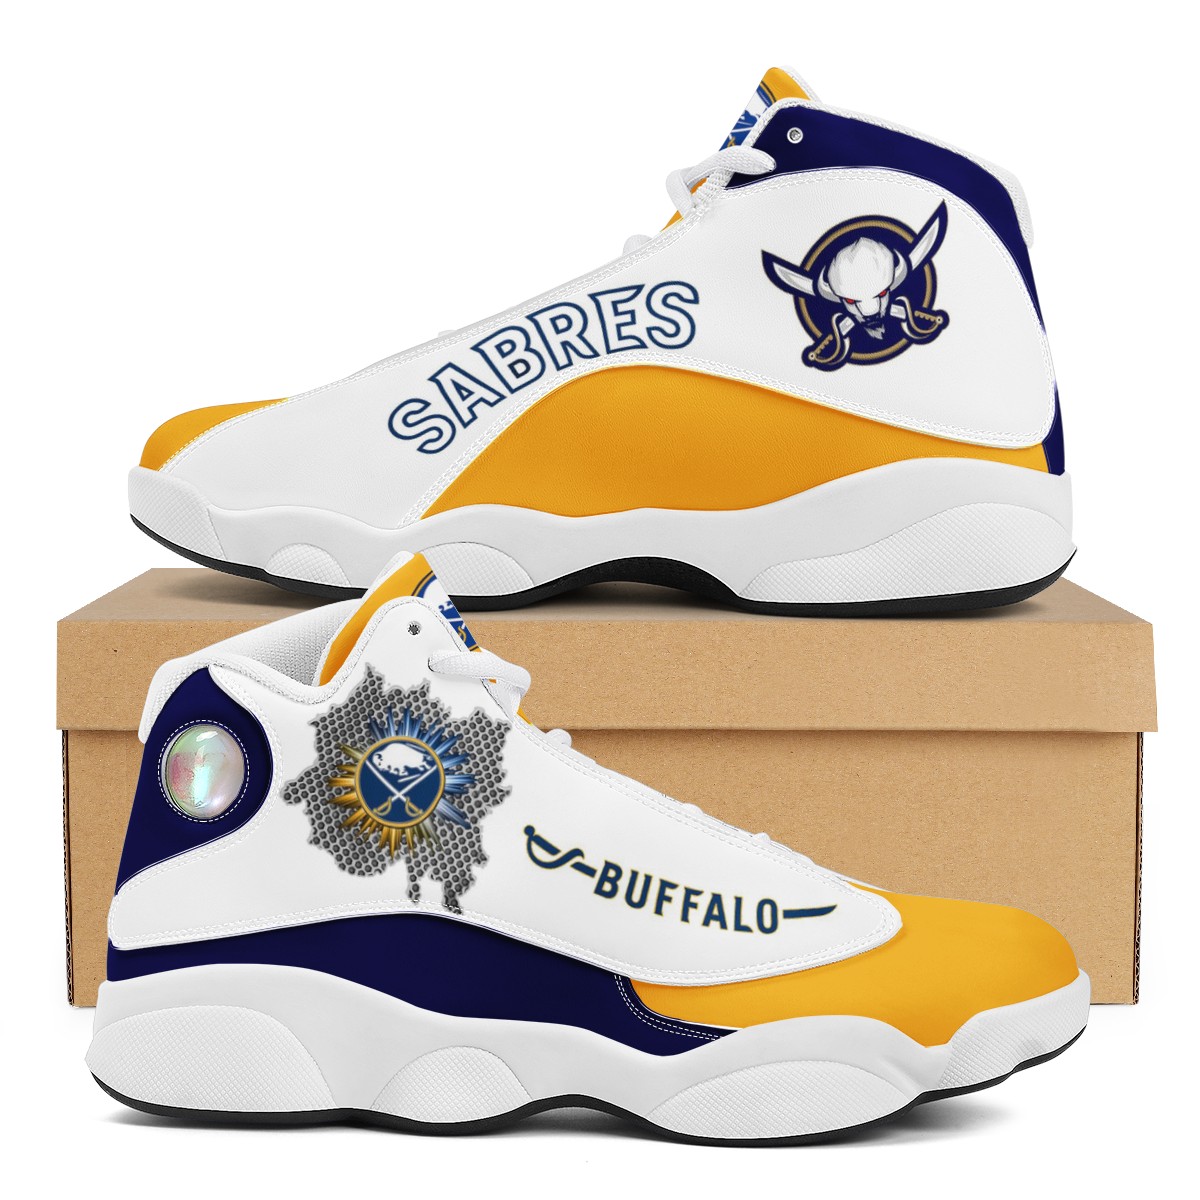 Women's Buffalo Sabres Limited Edition JD13 Sneakers 001